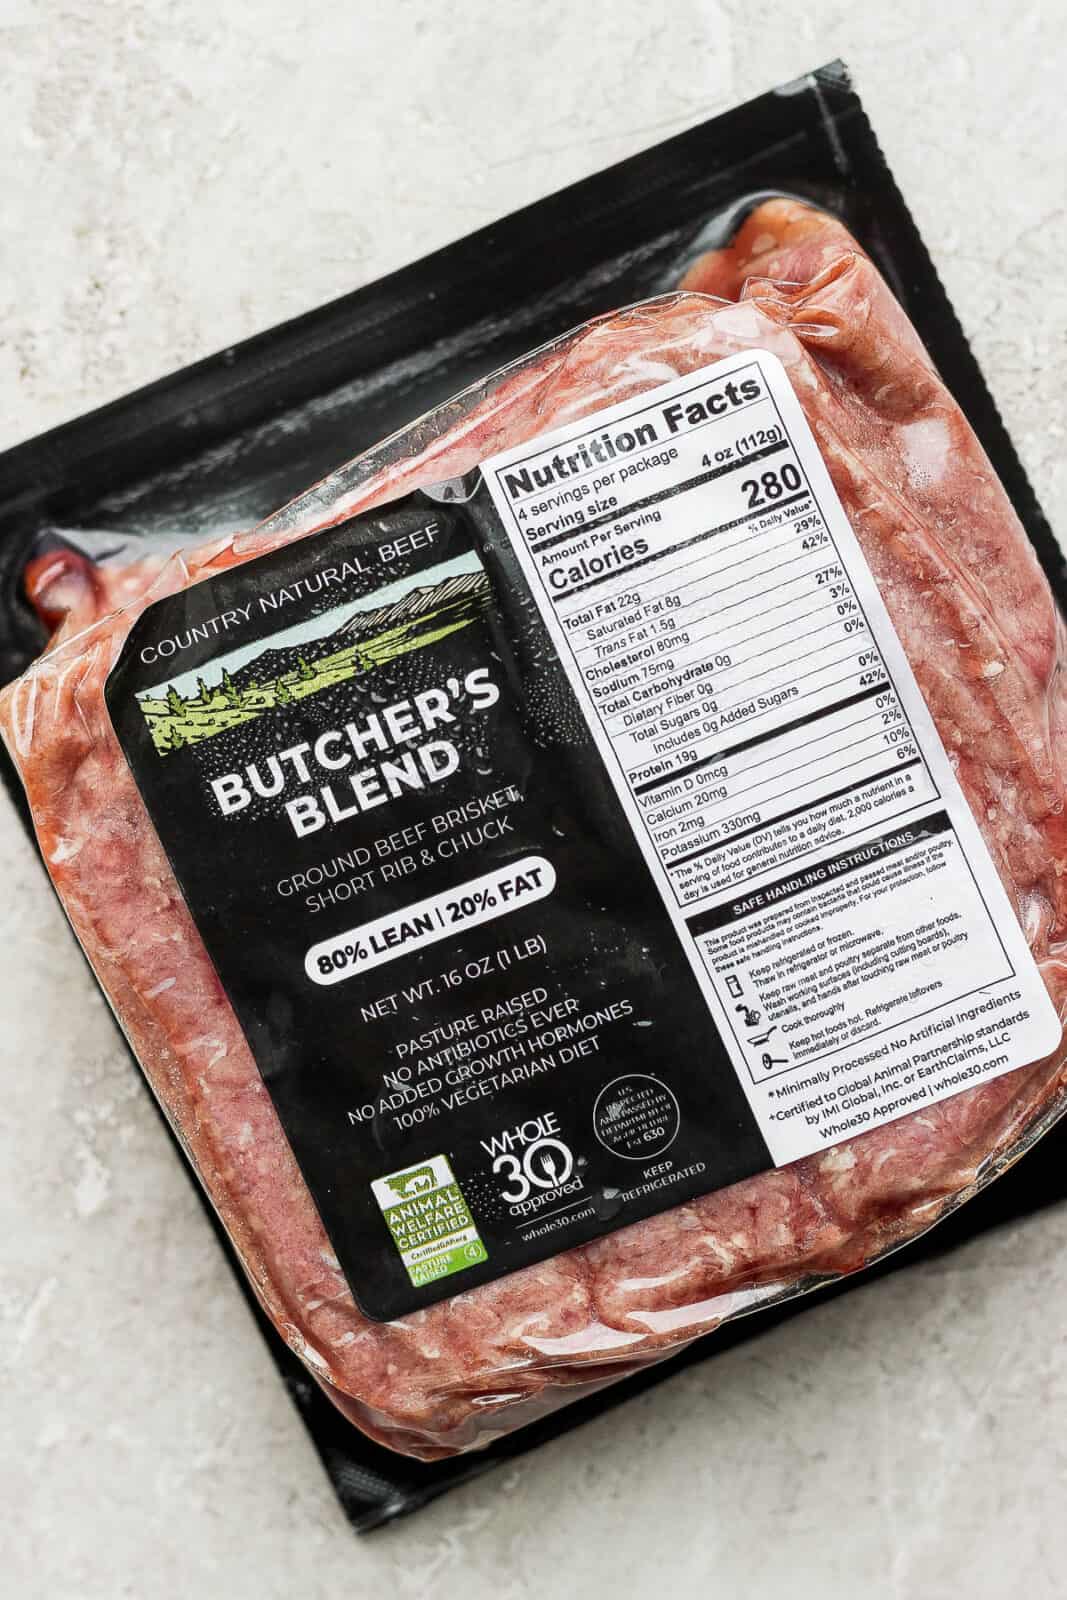 A package of Country Natural Beef Butcher Blend Ground beef. 